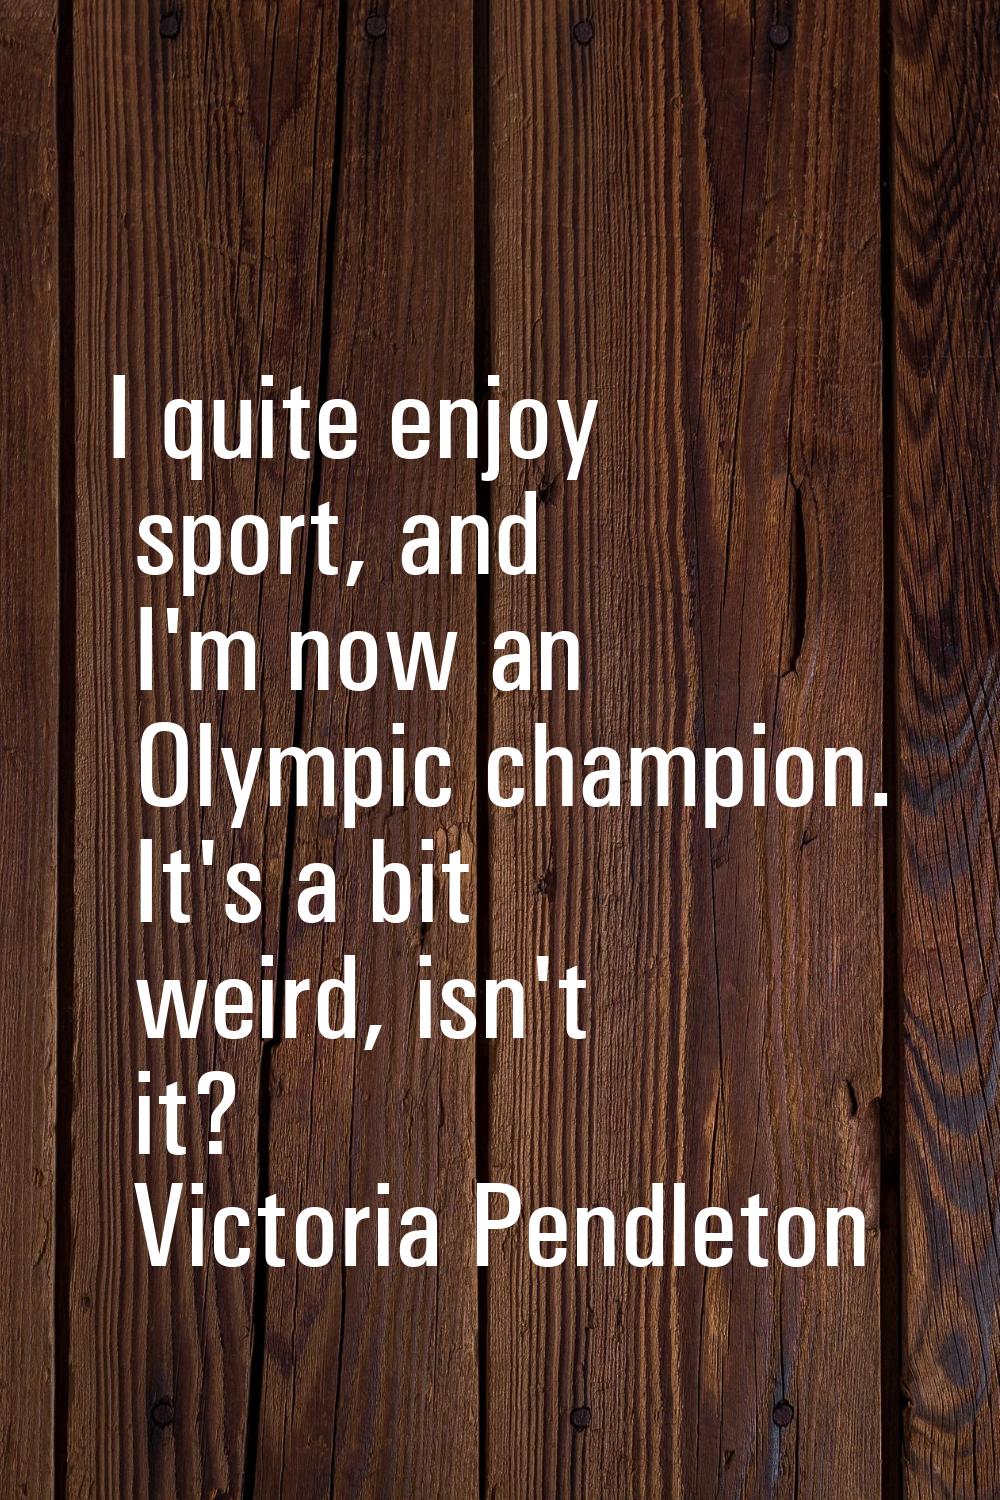 I quite enjoy sport, and I'm now an Olympic champion. It's a bit weird, isn't it?